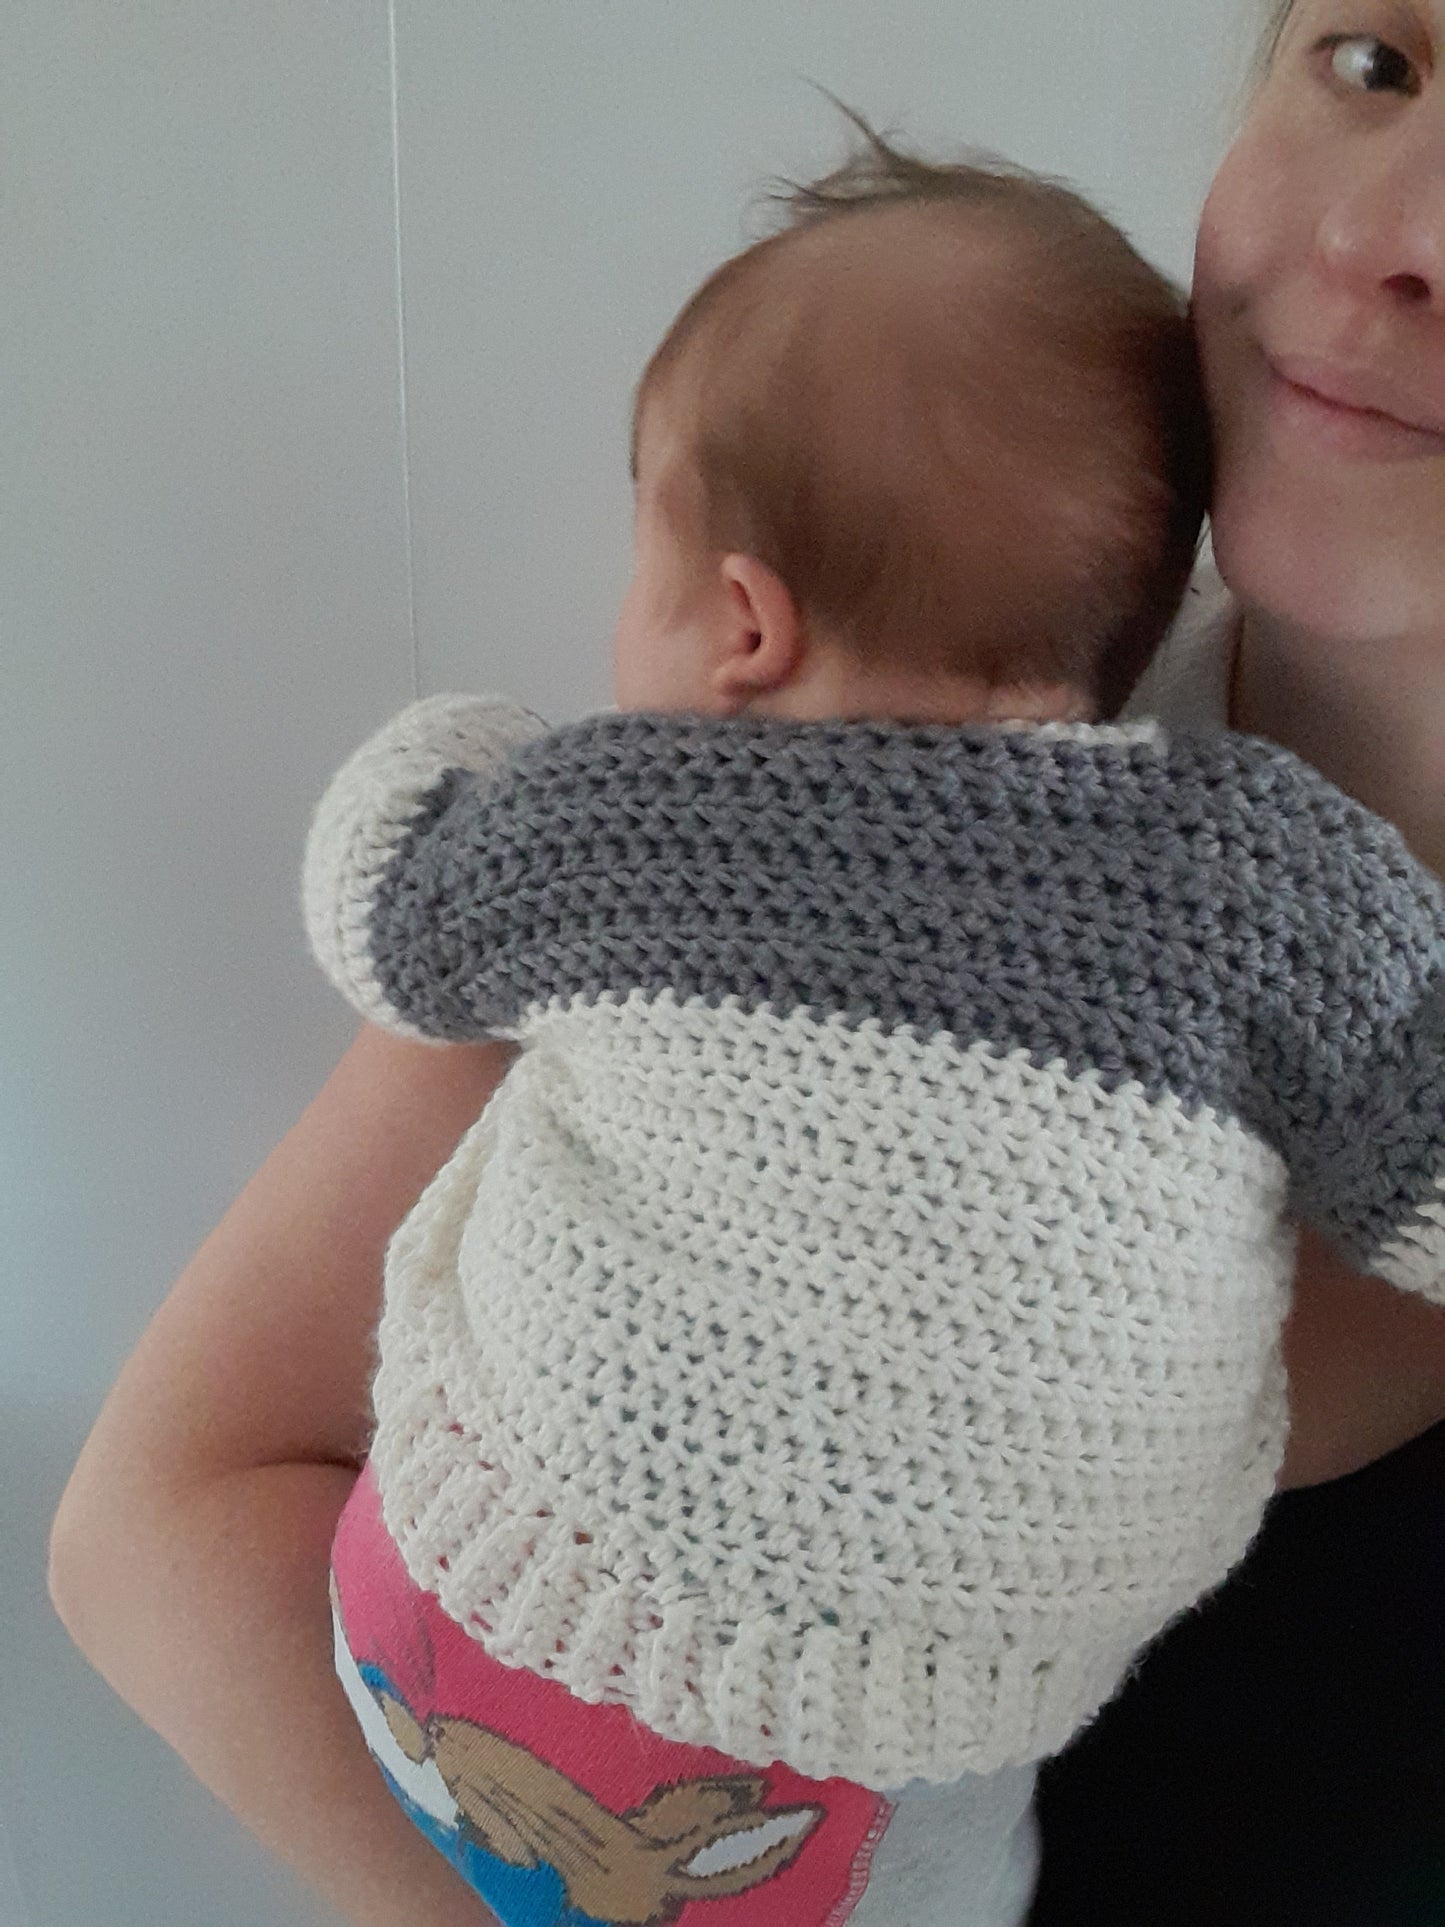 Lovechunk baby sweater